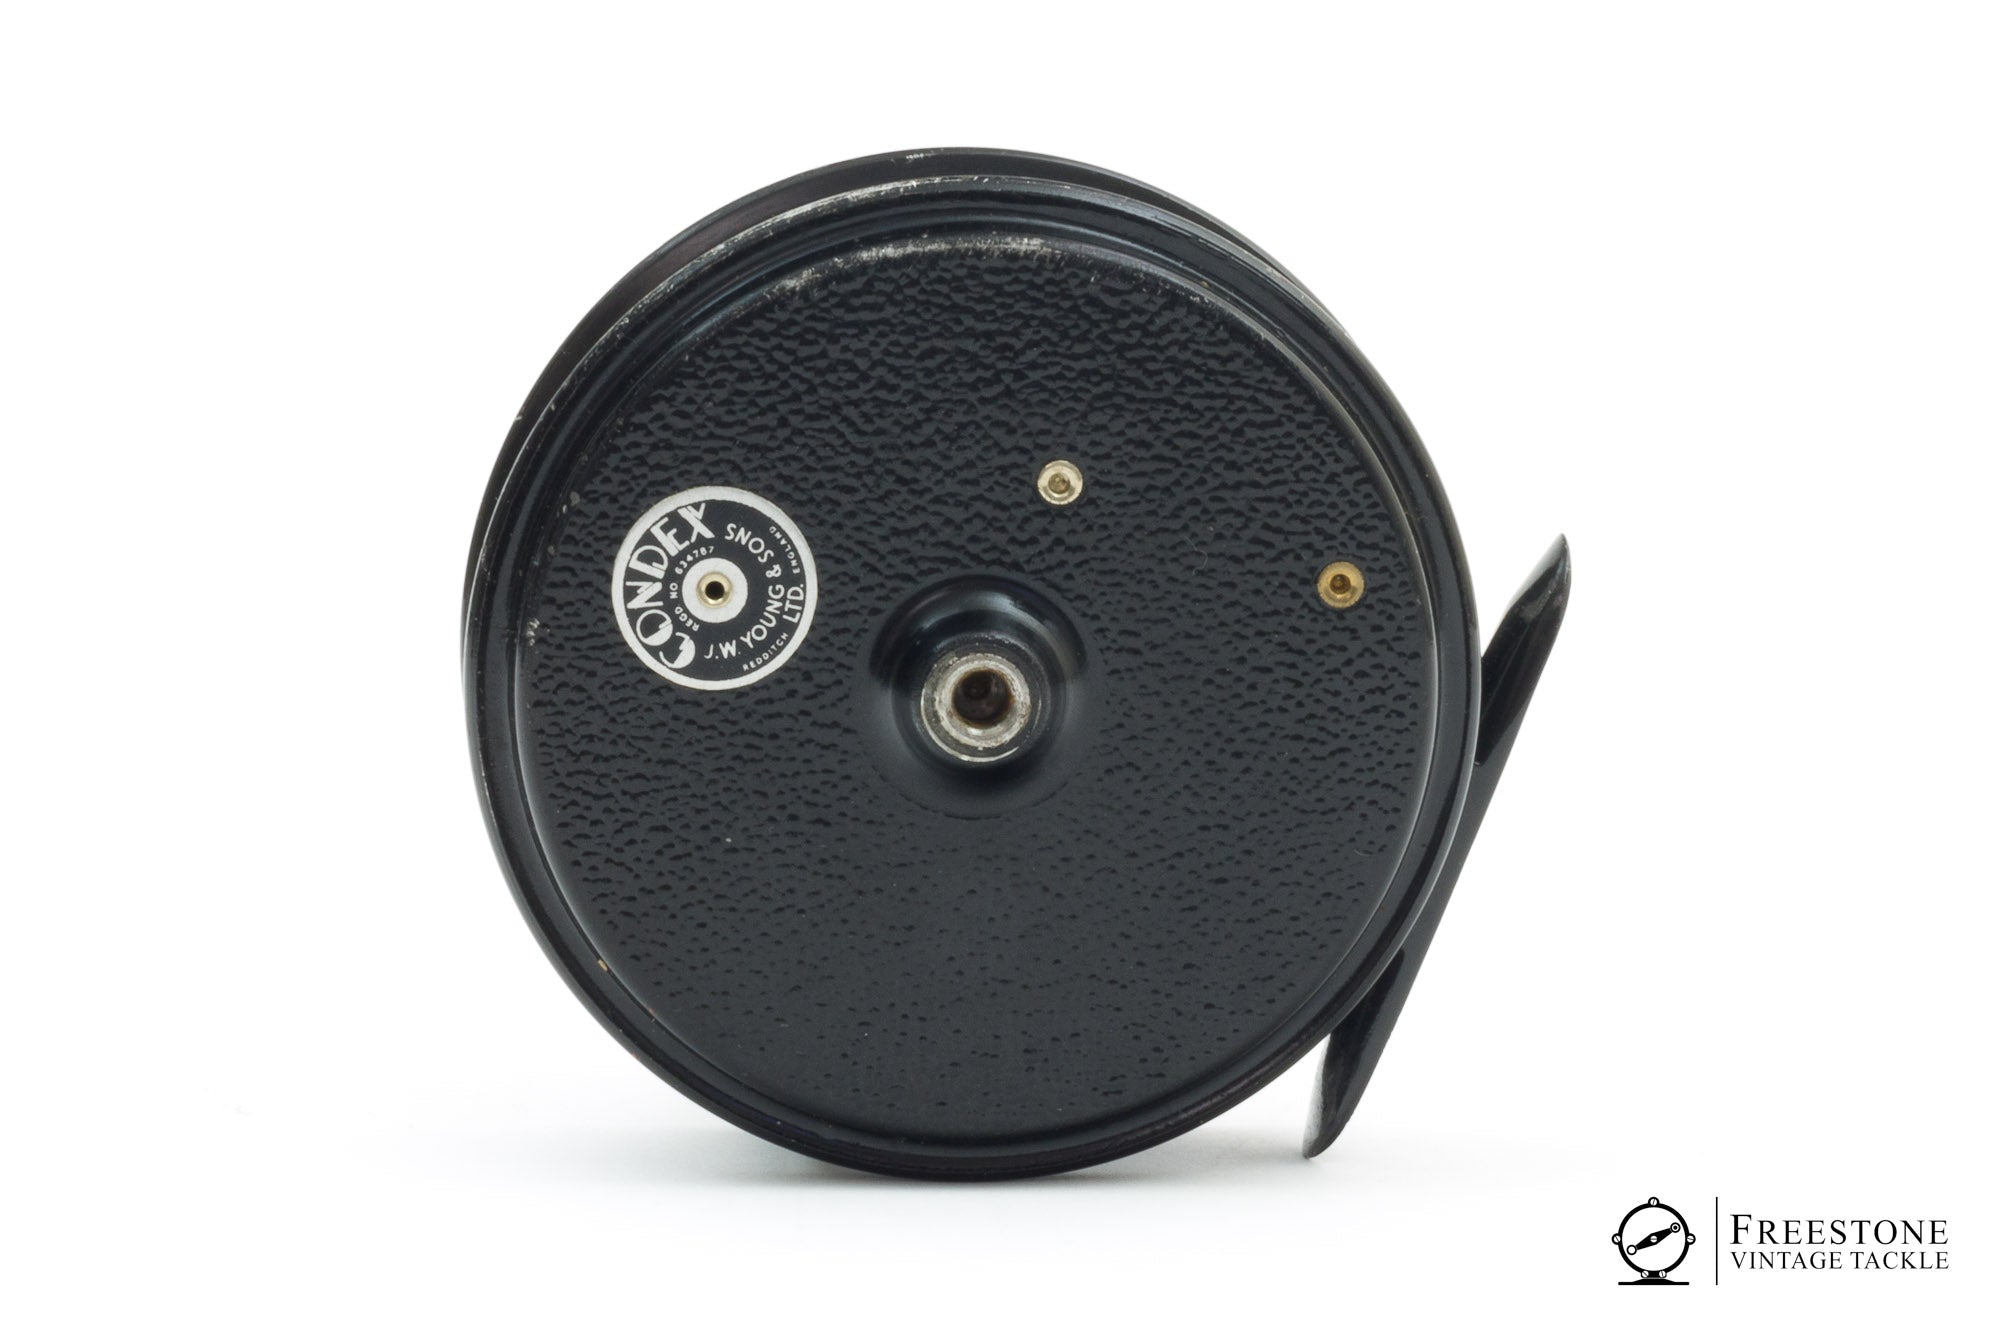 J.W. Young - The Condex 3 1/2 Fly Reel - Freestone Vintage Tackle